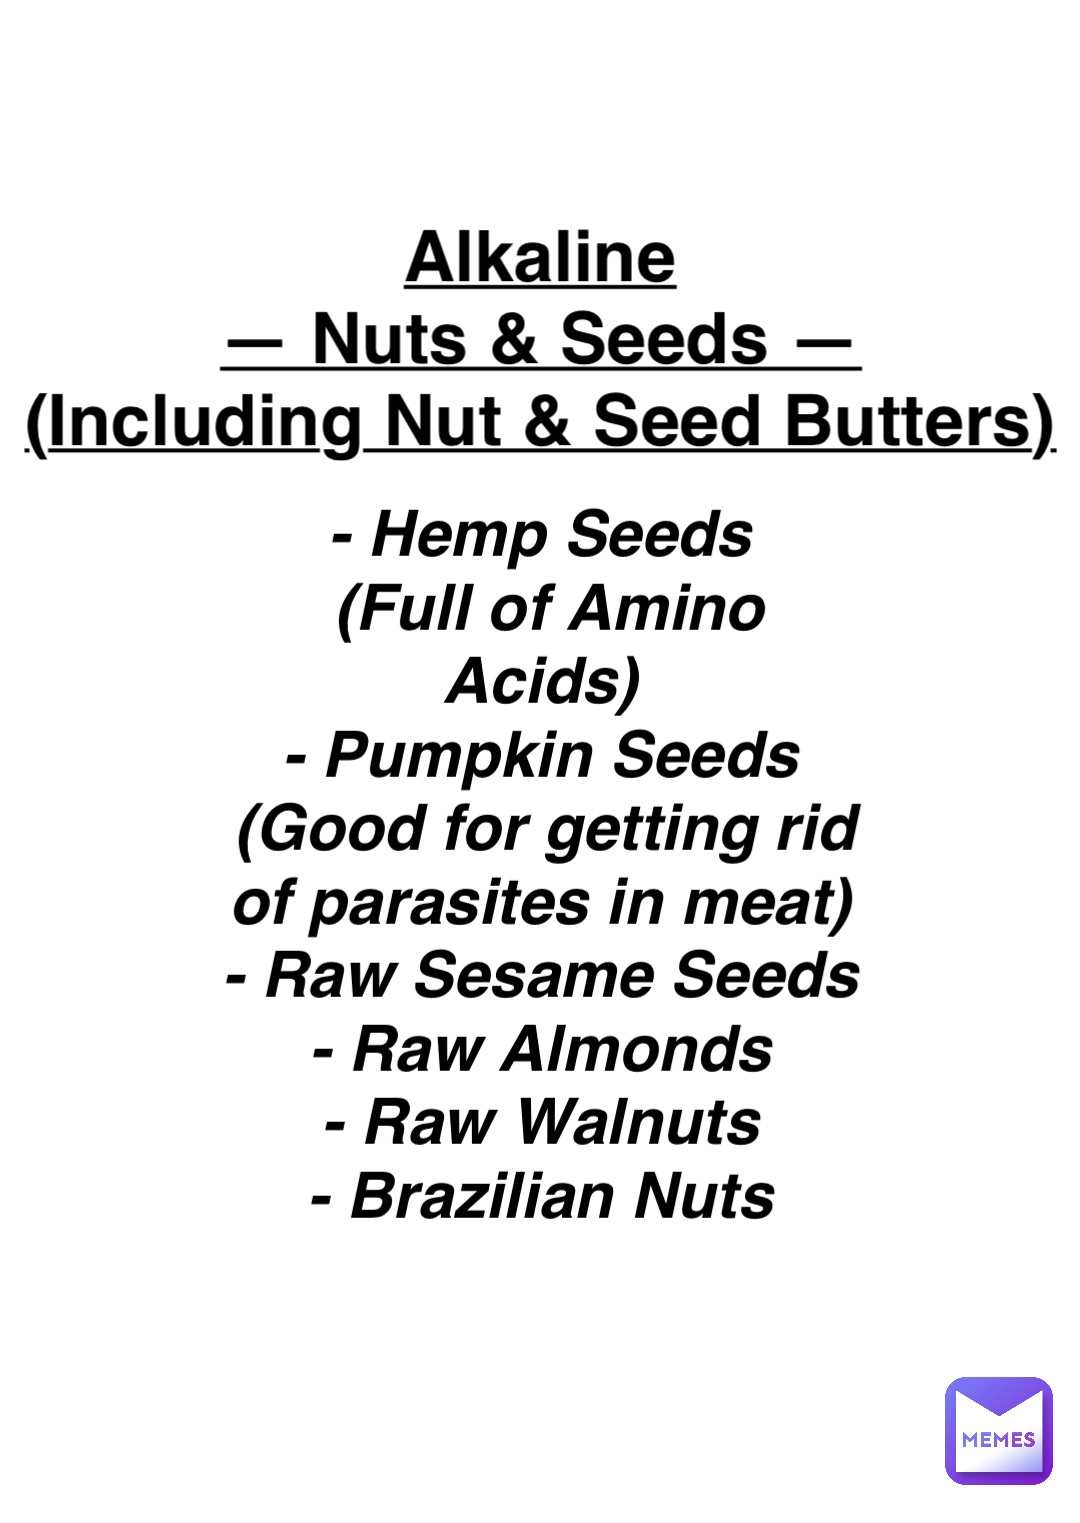 Double tap to edit Alkaline
— Nuts & Seeds —
(Including Nut & Seed Butters) - Hemp Seeds
(Full of Amino Acids)
- Pumpkin Seeds
(Good for getting rid 
of parasites in meat)
- Raw Sesame Seeds
- Raw Almonds
- Raw Walnuts
- Brazilian Nuts